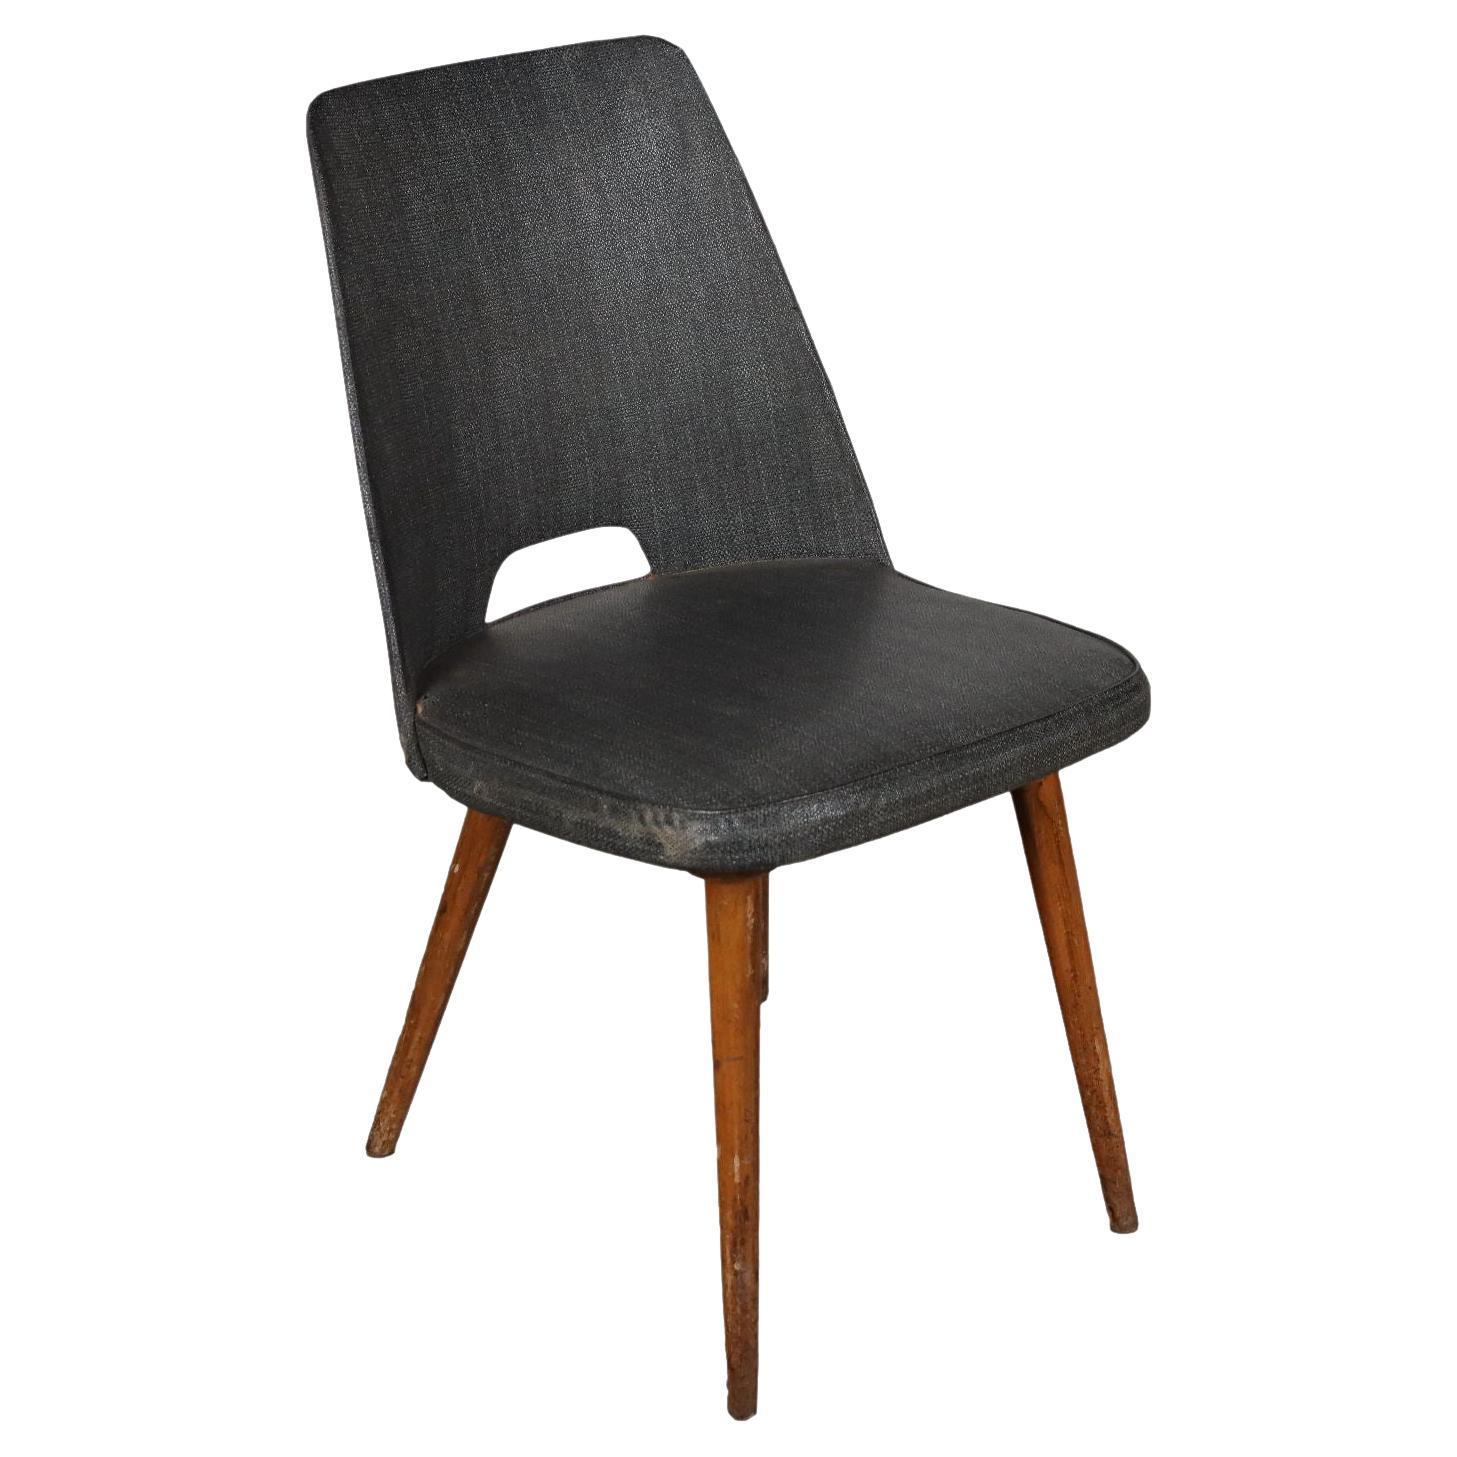 Vintage Chair Beech Leatherette, Switzerland, 1950s-1960s For Sale